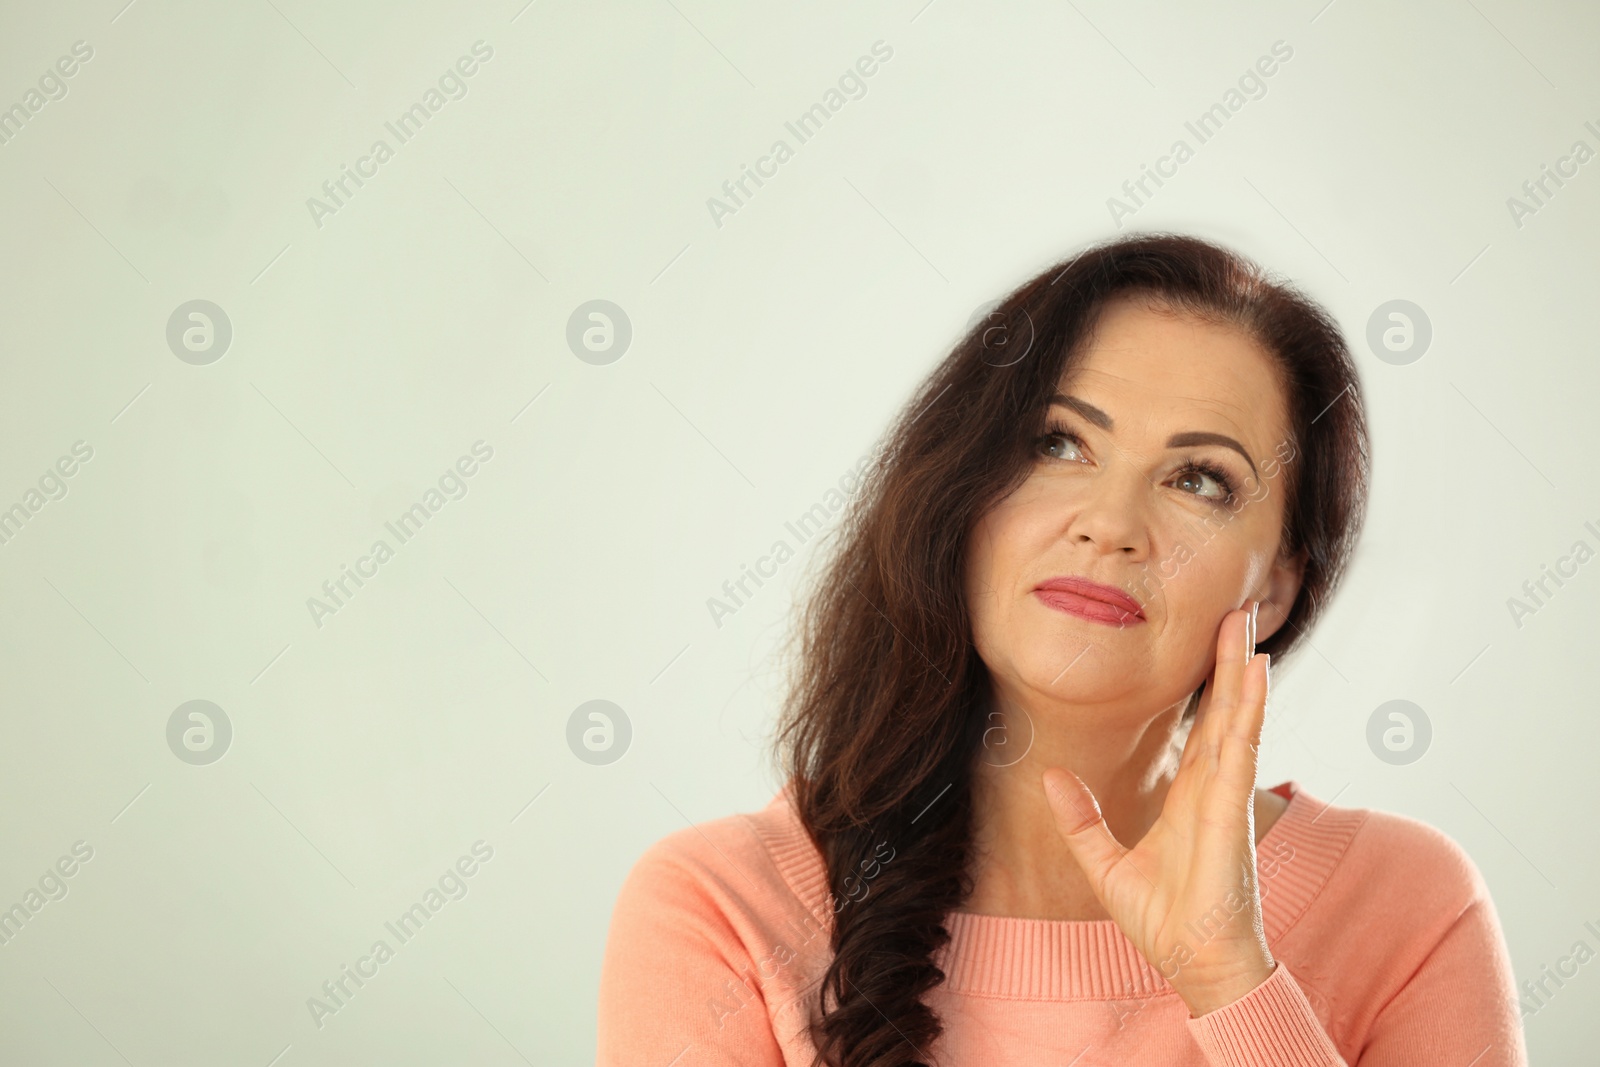 Photo of Portrait of beautiful older woman on light background with space for text